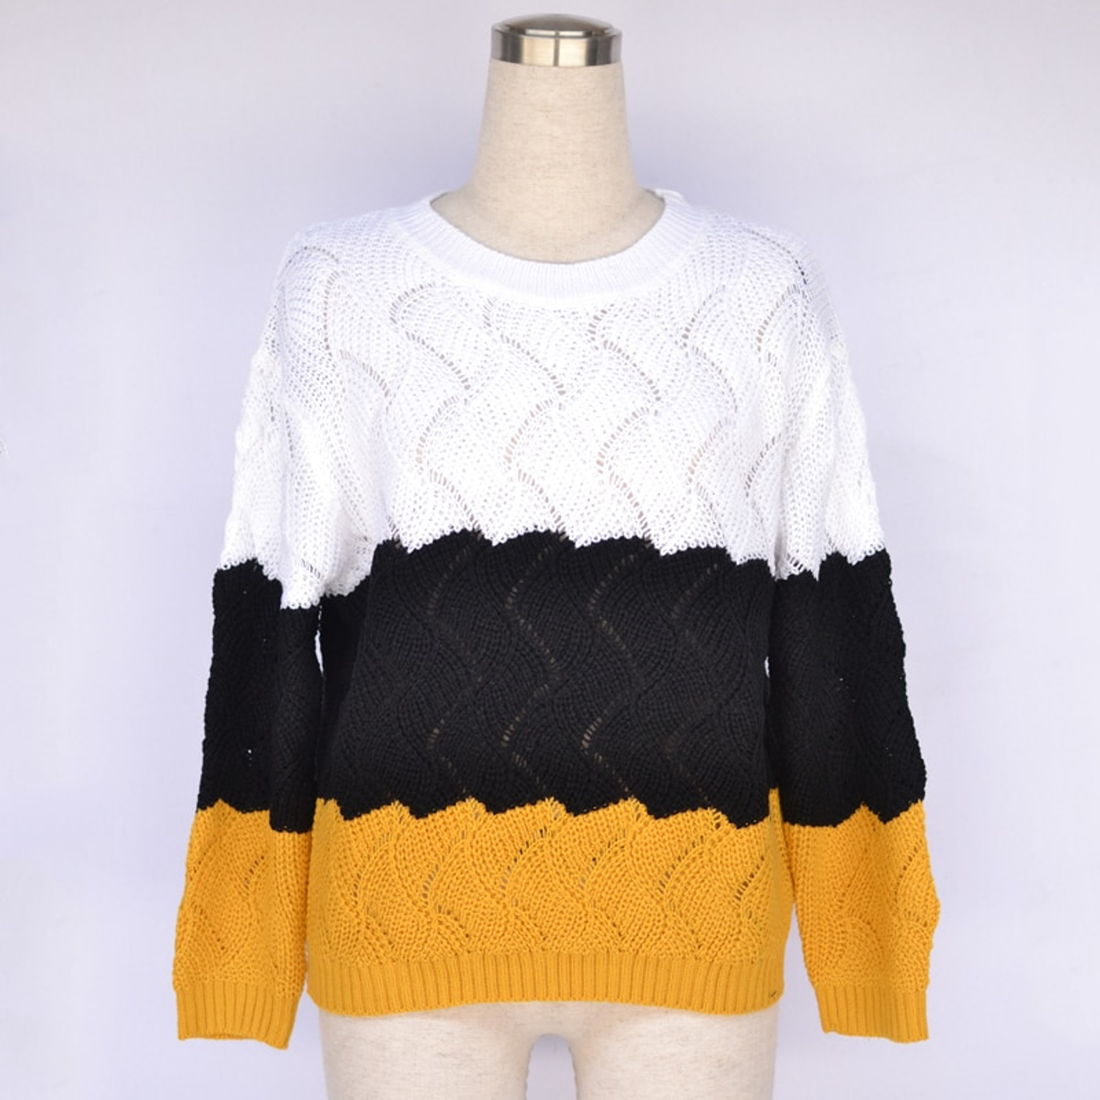 Women's Autumn/Winter Casual Long Sleeve Knitted Sweater